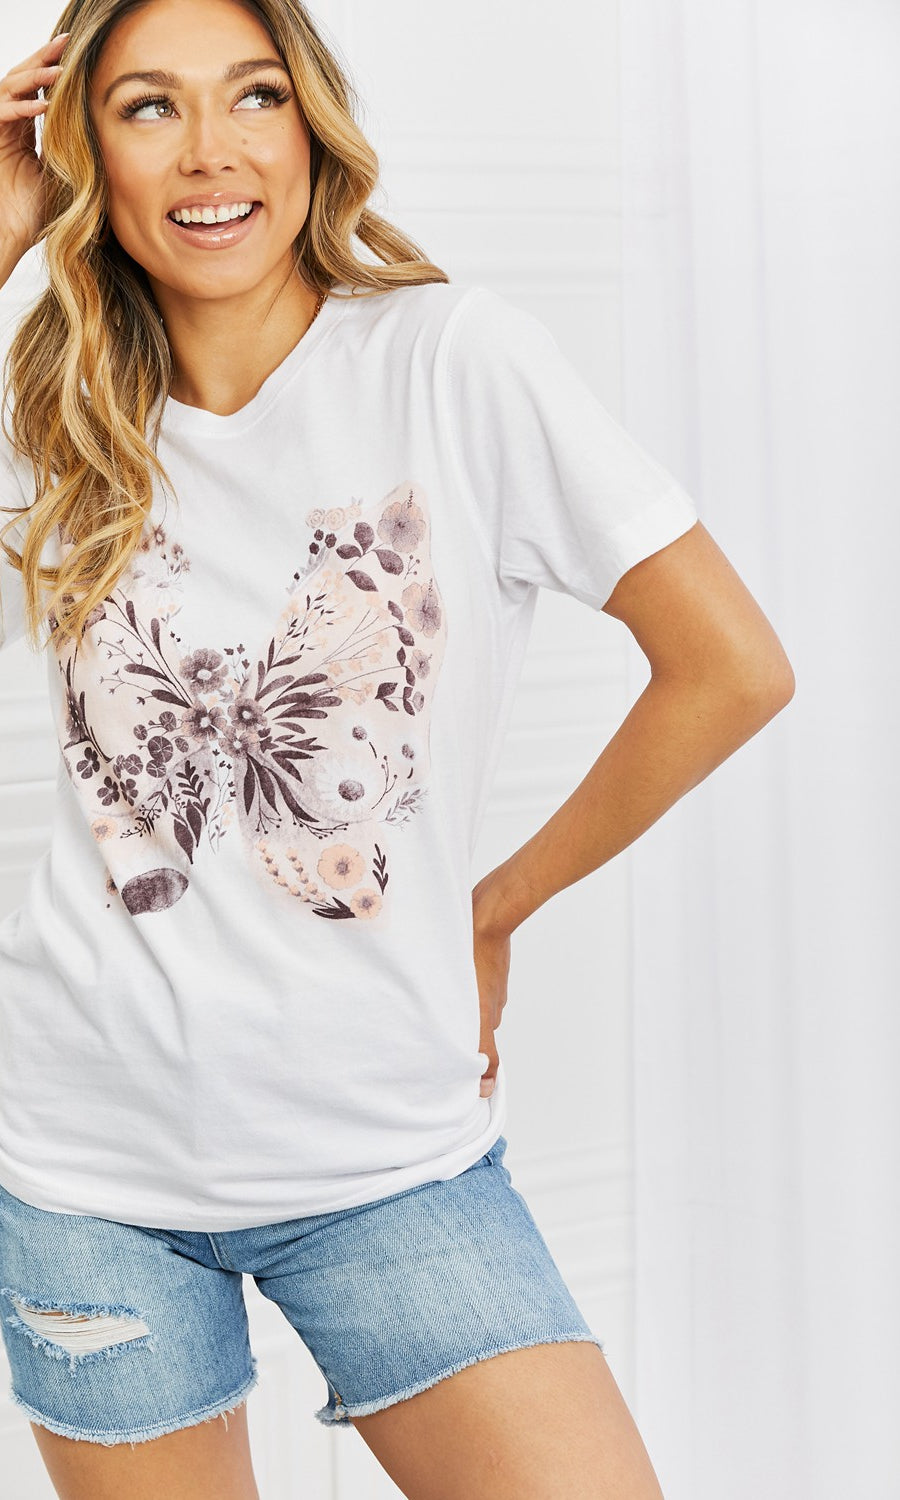 mineB You Give Me Butterflies Graphic T-Shirt mineB